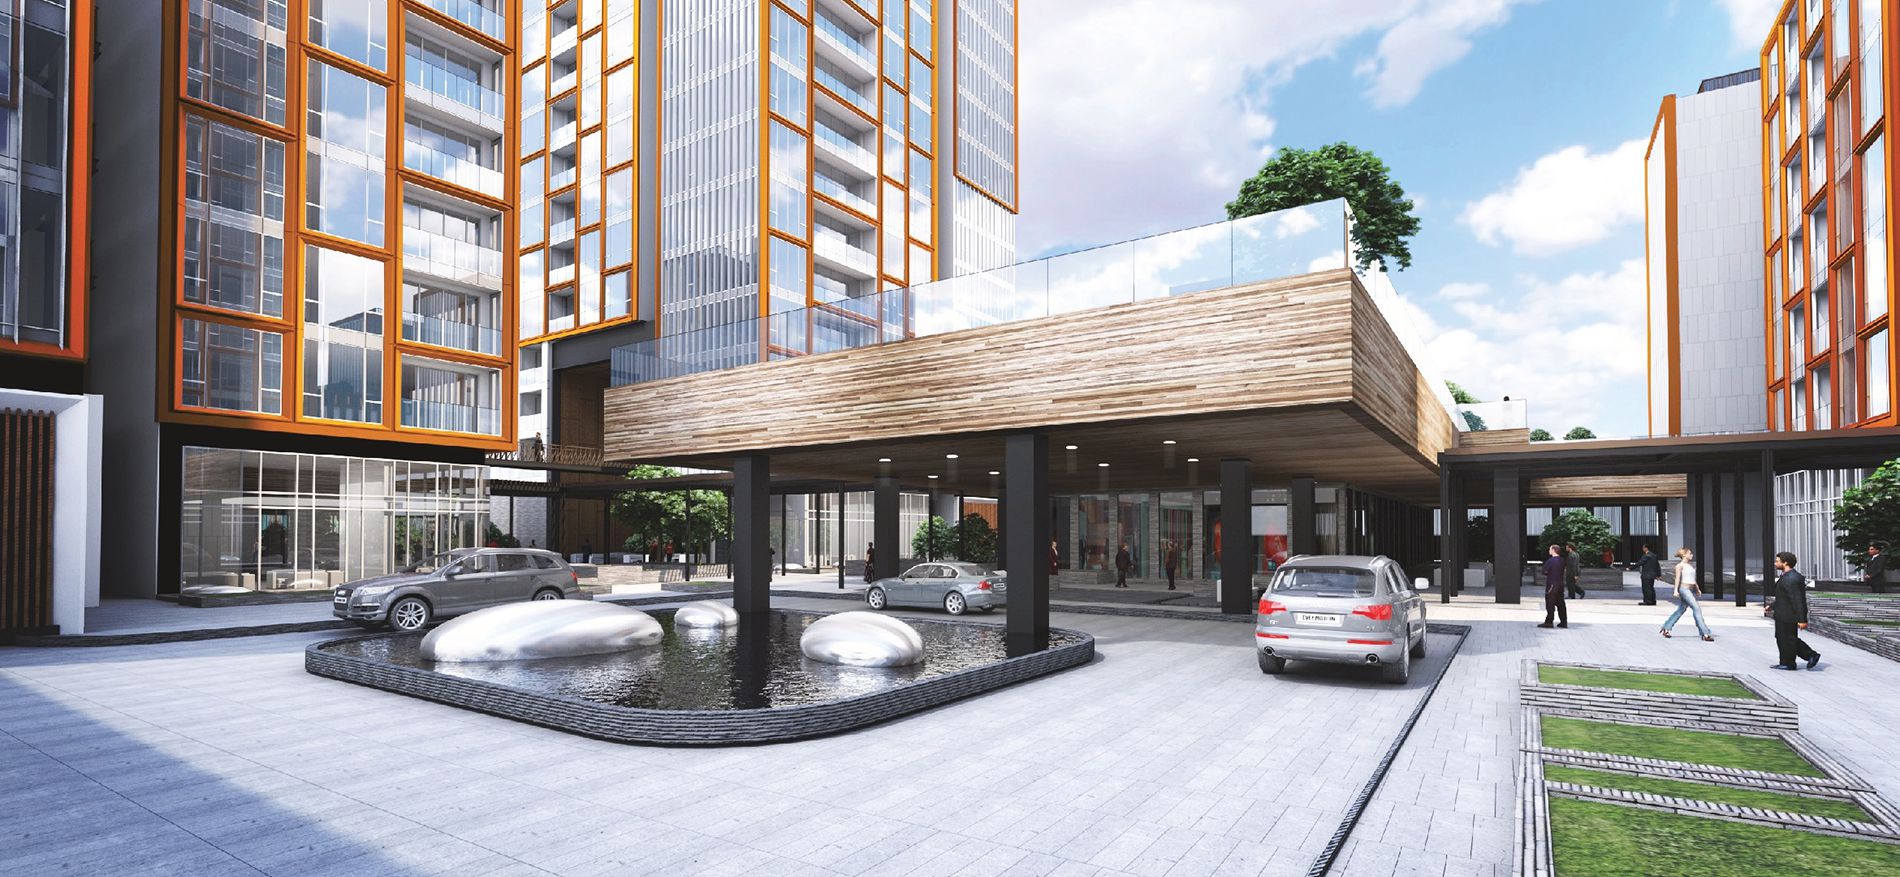 tilia 1 - Tilia Residence - Empire City 2BR - A Haven of Luxury & Comfort in the Heart of Thu Thiem